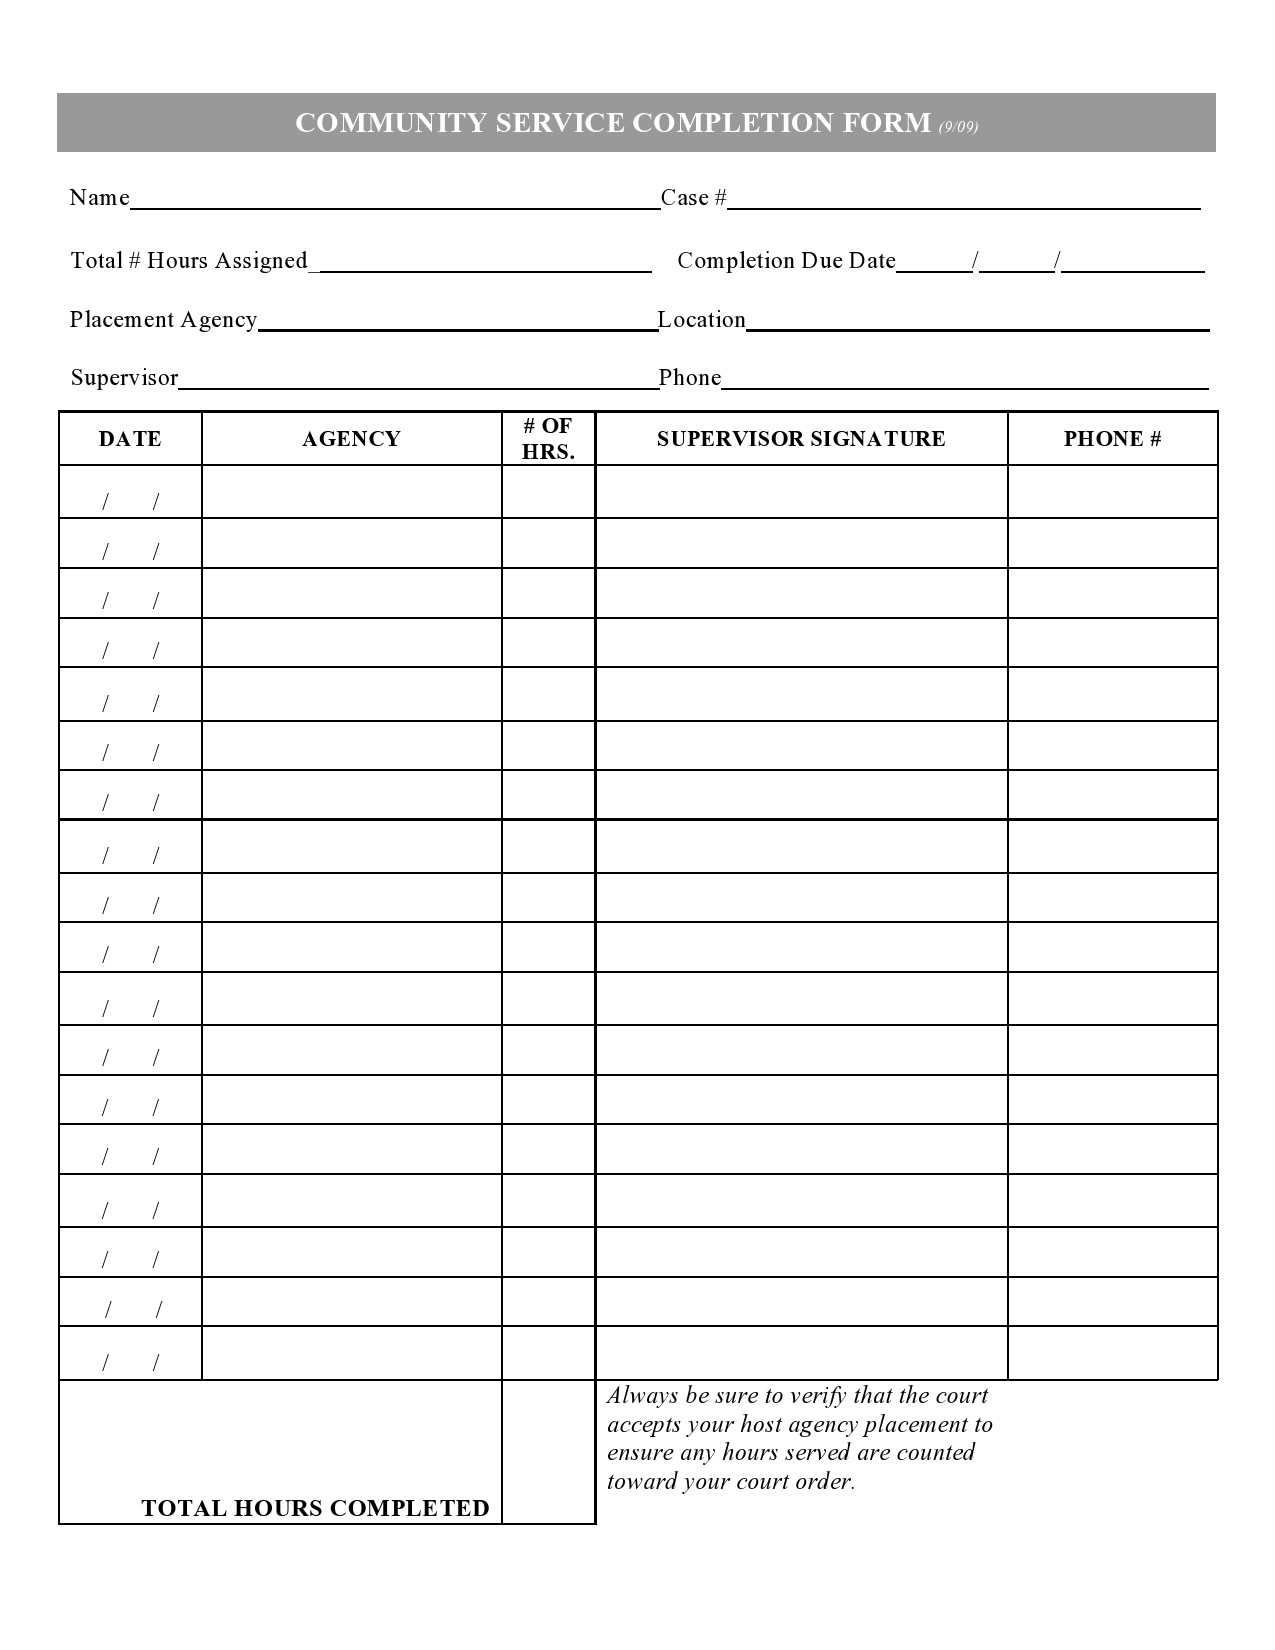 Printable Community Service Forms For Court Printable Forms Free Online